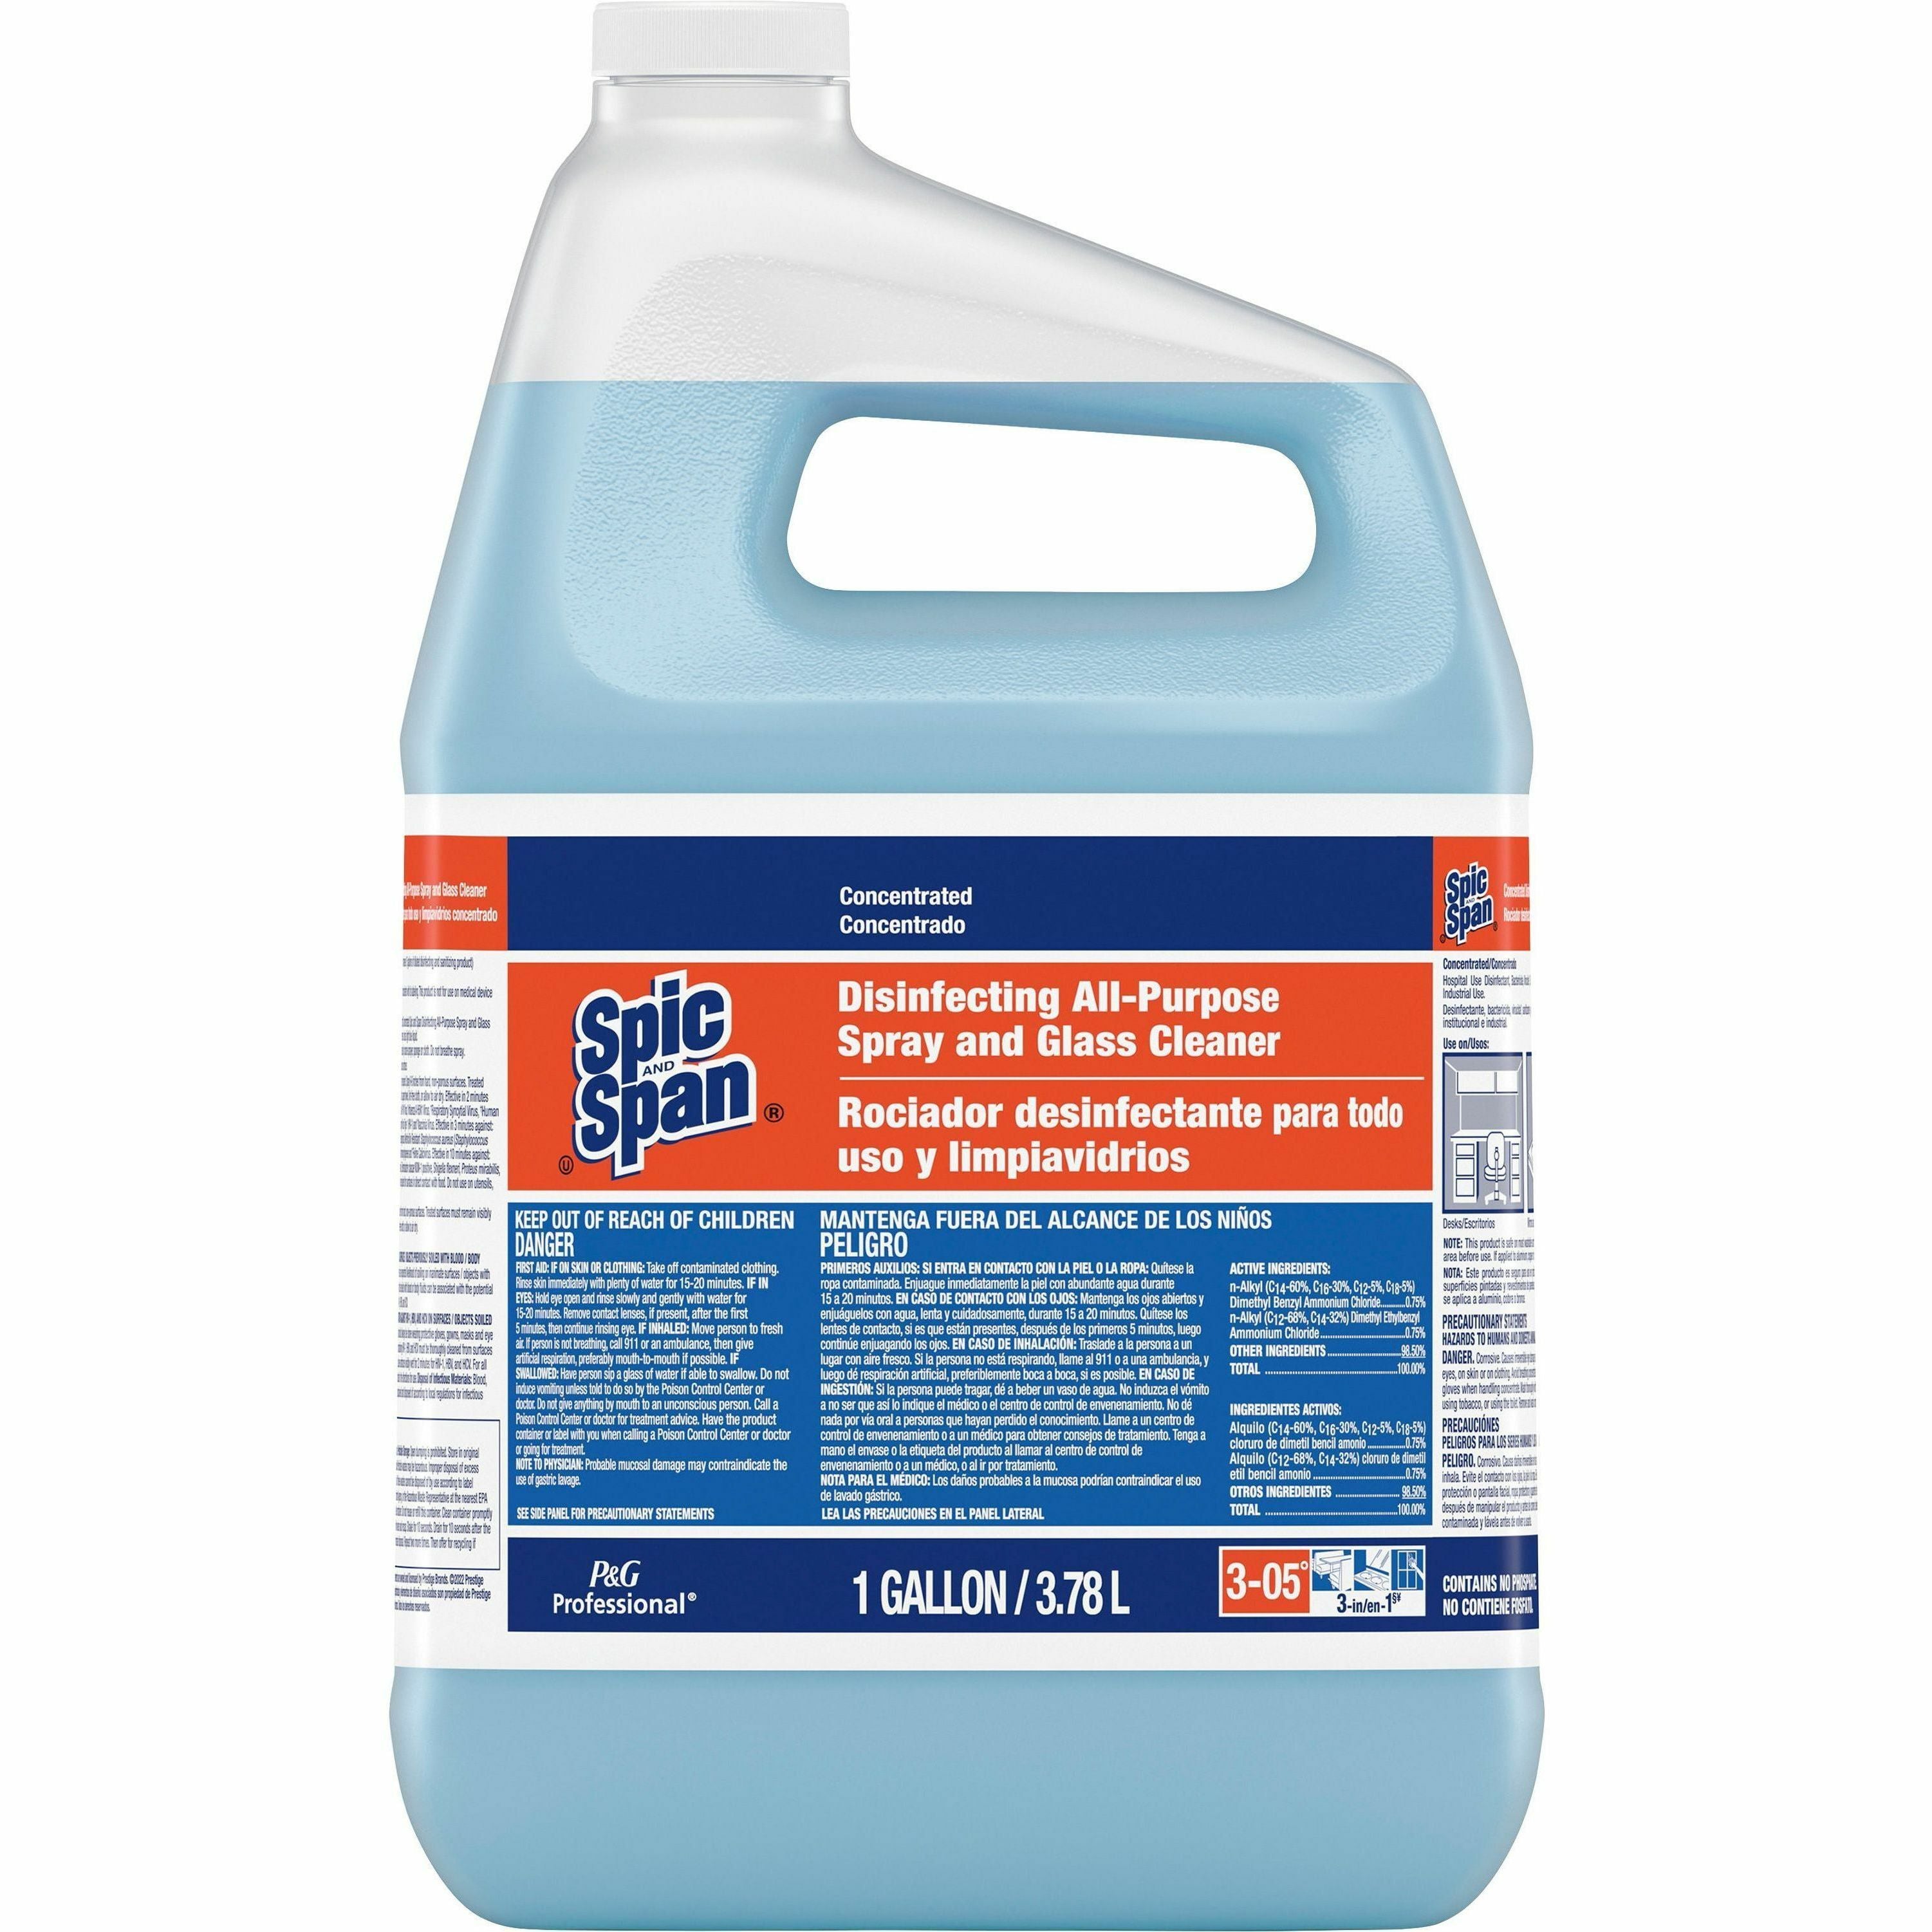 spic-and-span-disinfecting-all-purpose-spray-and-glass-cleaner-for-multipurpose-concentrate-128-fl-oz-4-quart-2-carton-streak-free-disinfectant-clear-blue_pgc32538ct - 2